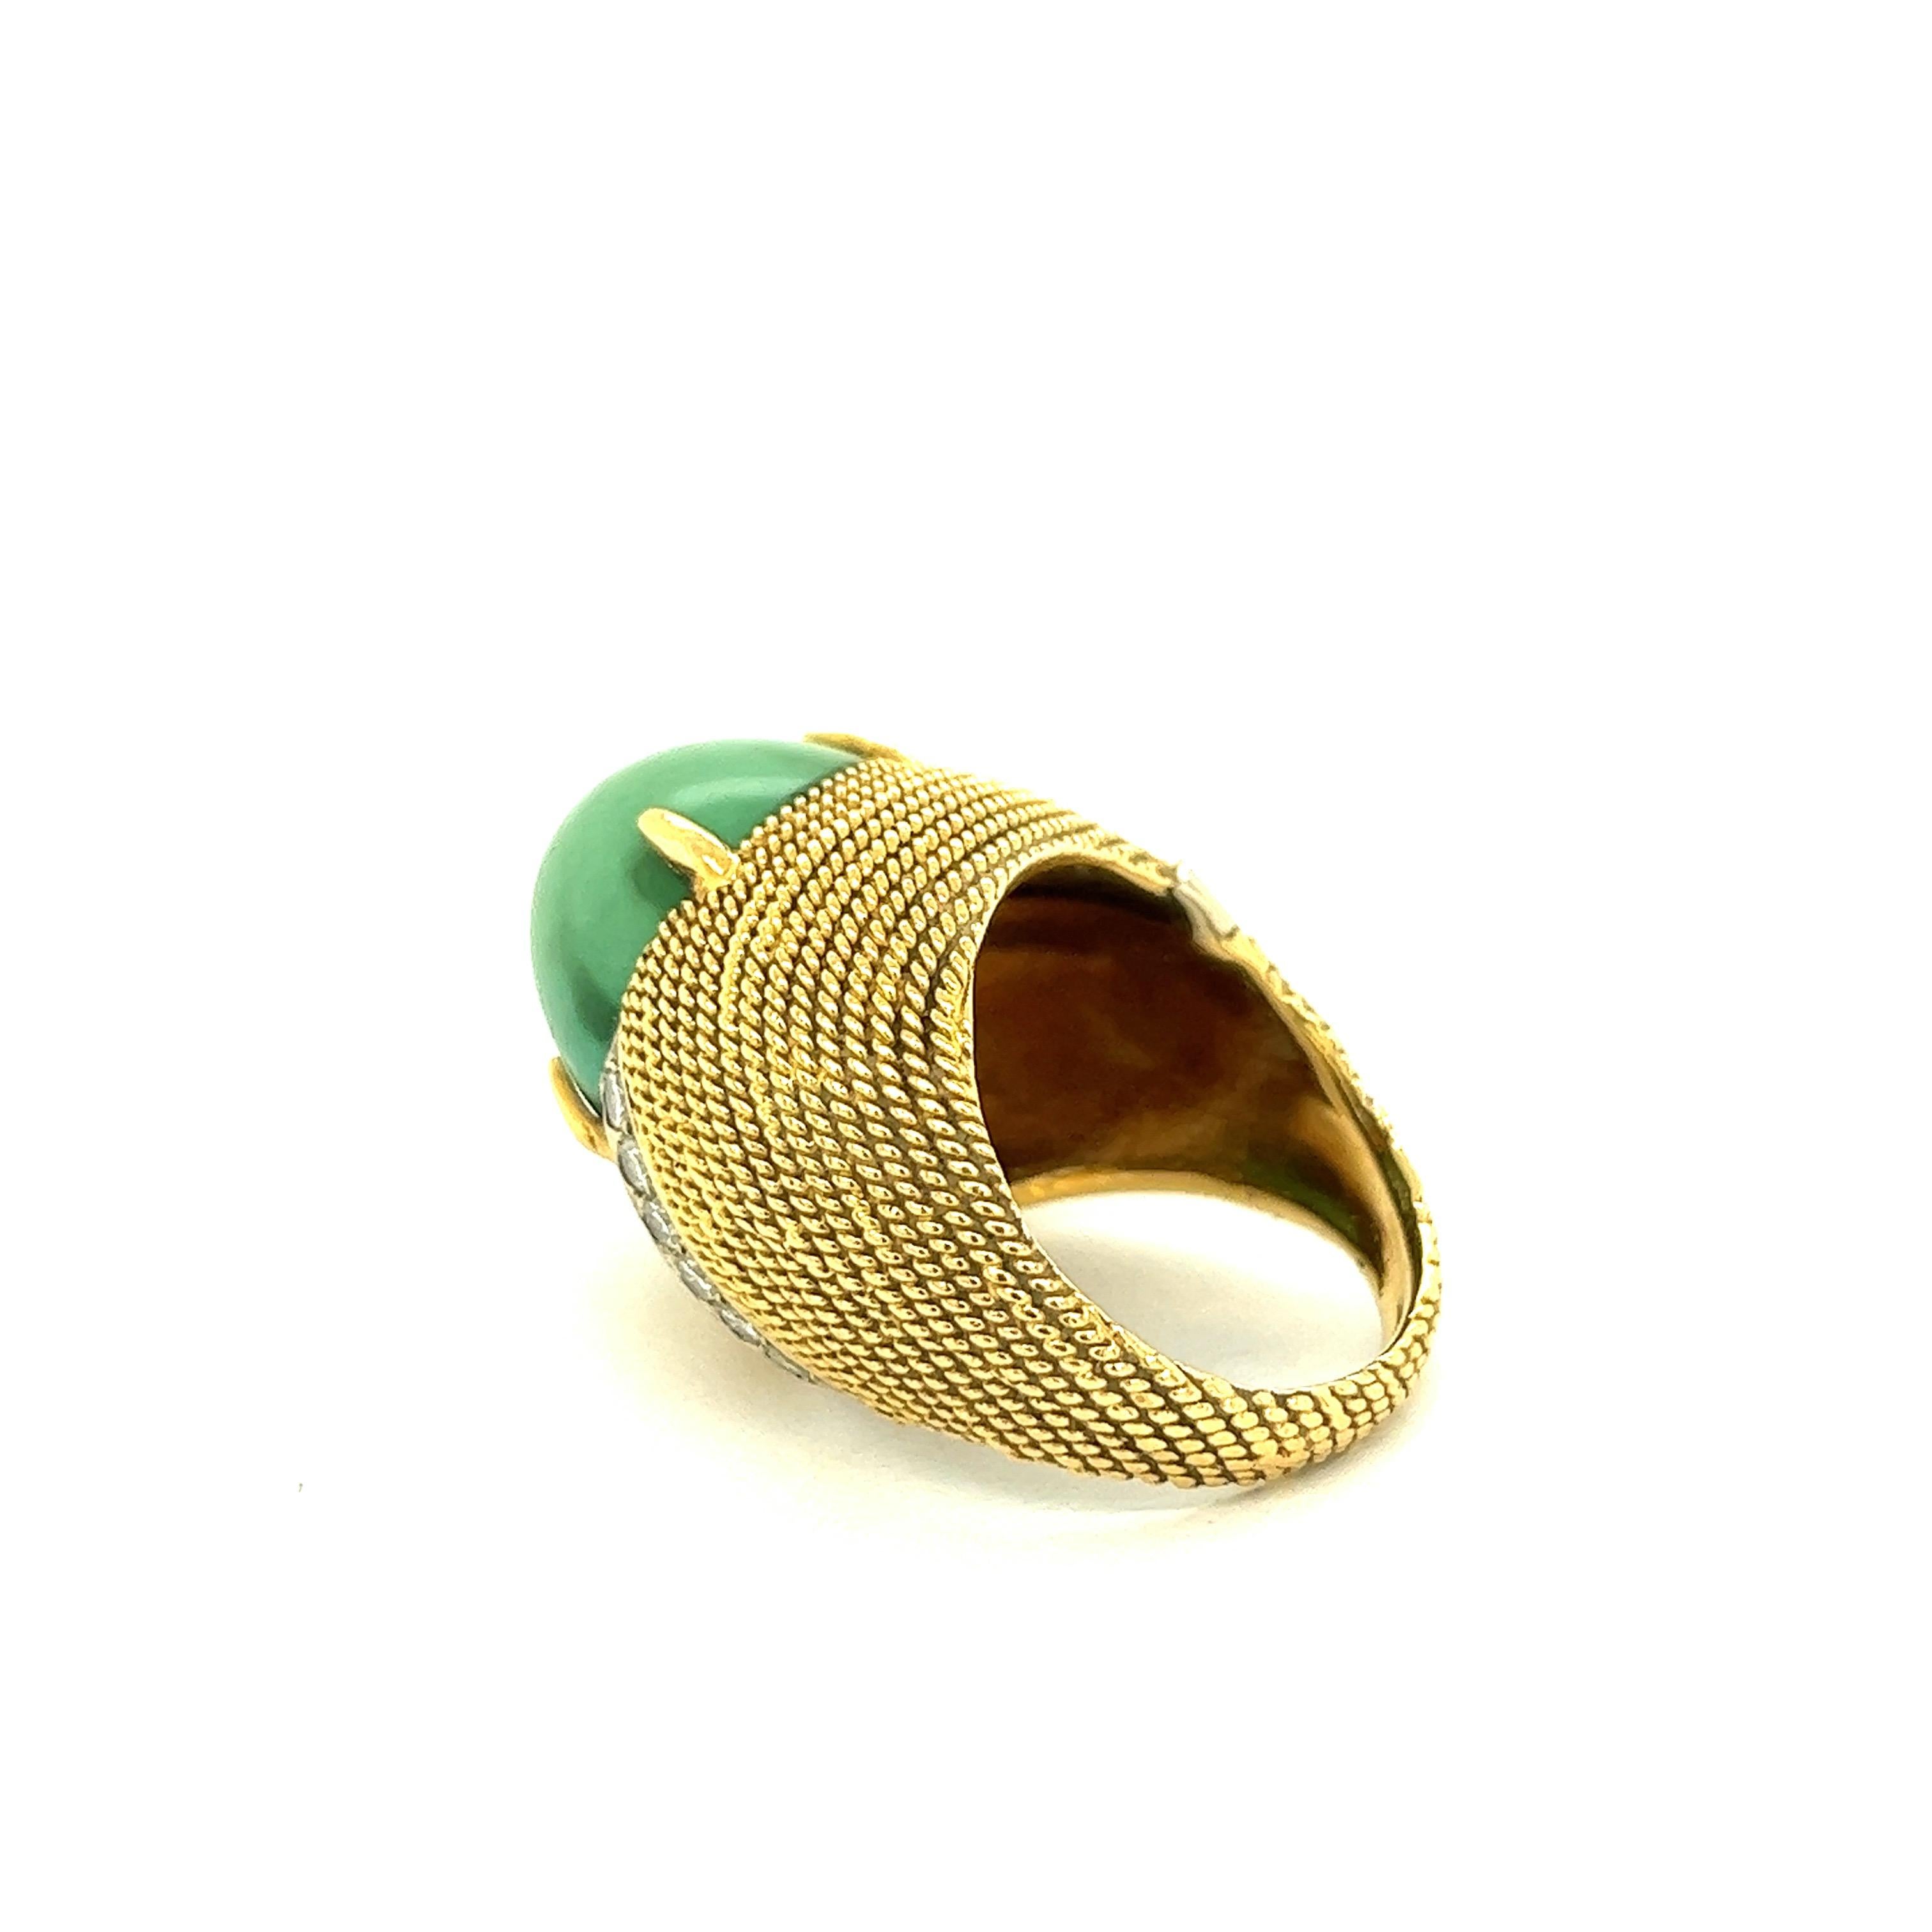 Cabochon Green Turquoise 18k Yellow Gold Cocktail Ring For Sale 2